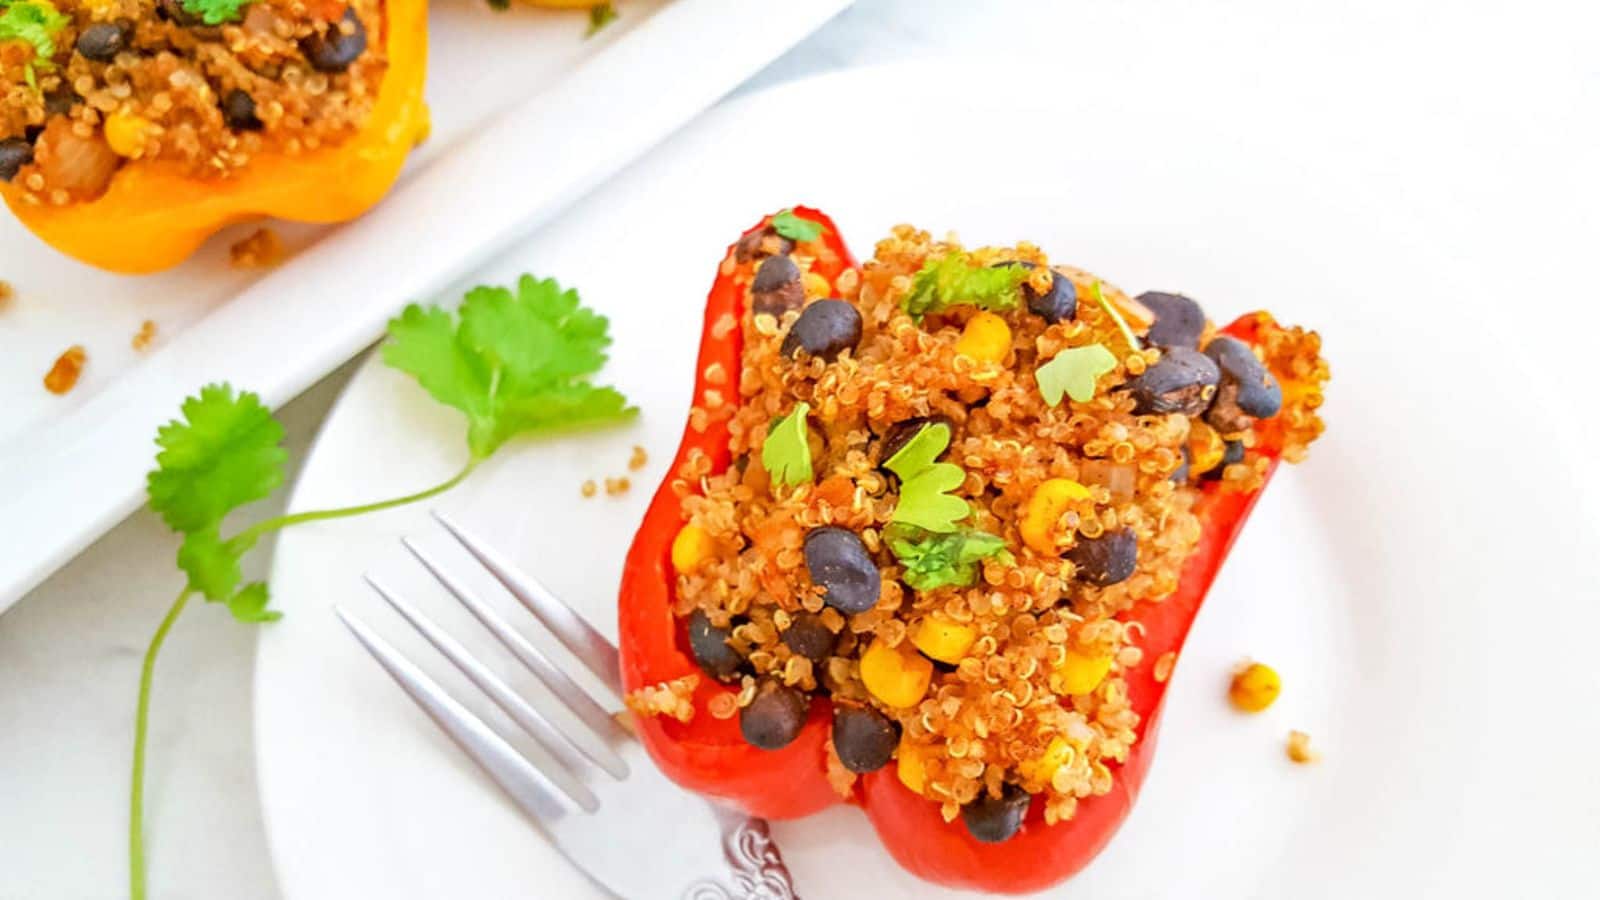 Your guests will love this zesty quinoa stuffed peppers recipe